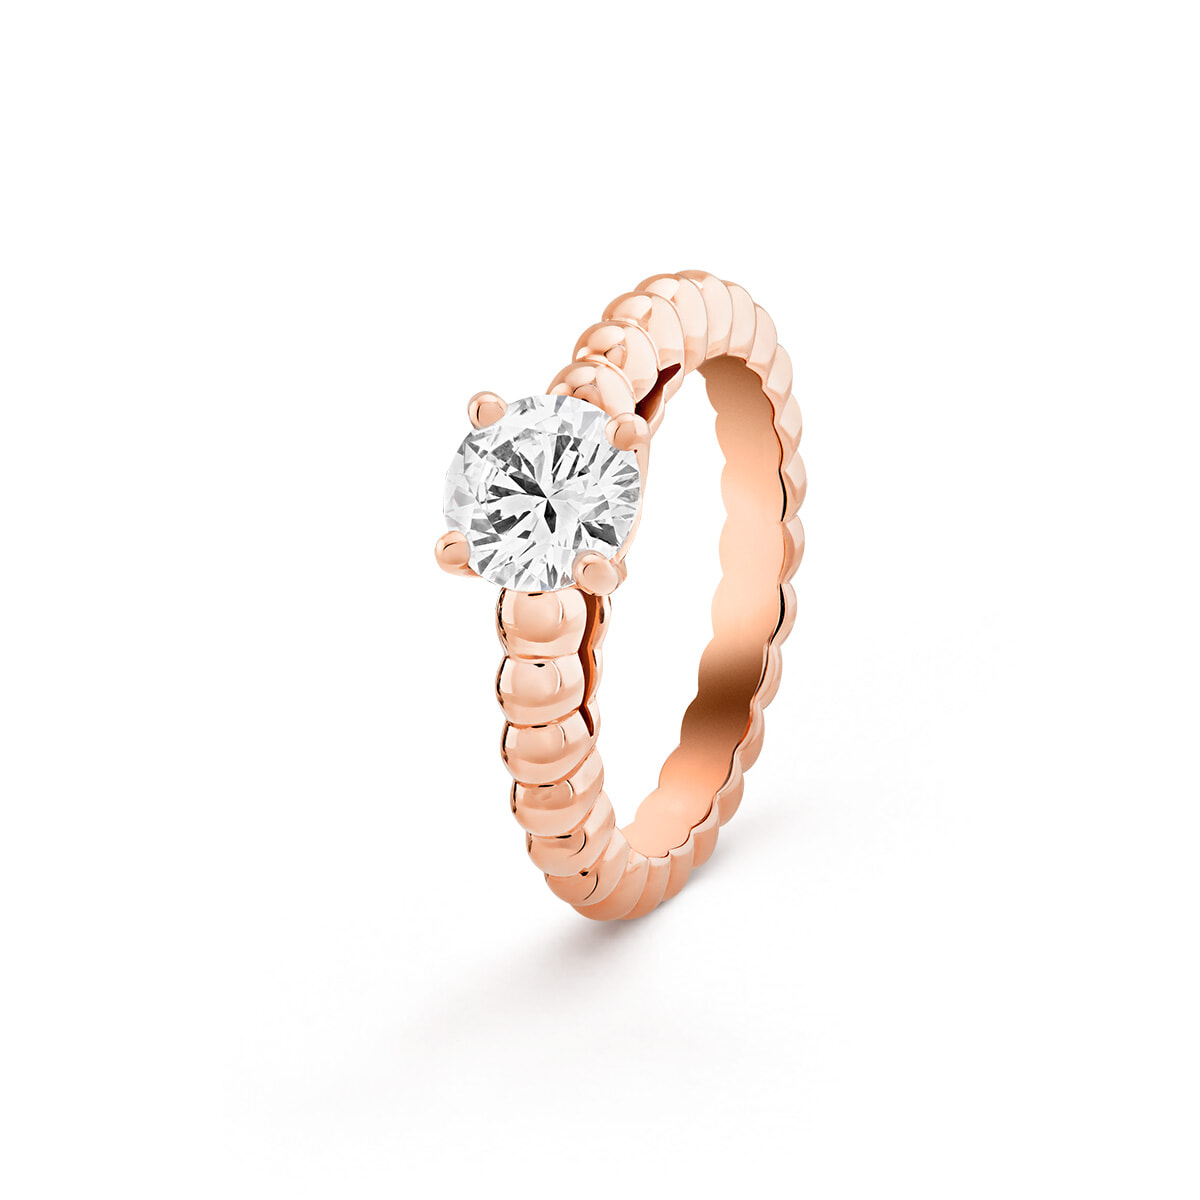 230614_3_vcaro1w400-web-engagement-ring-solitaire-perlee-3-4-01-rose-gold-1ct_2017642.jpg